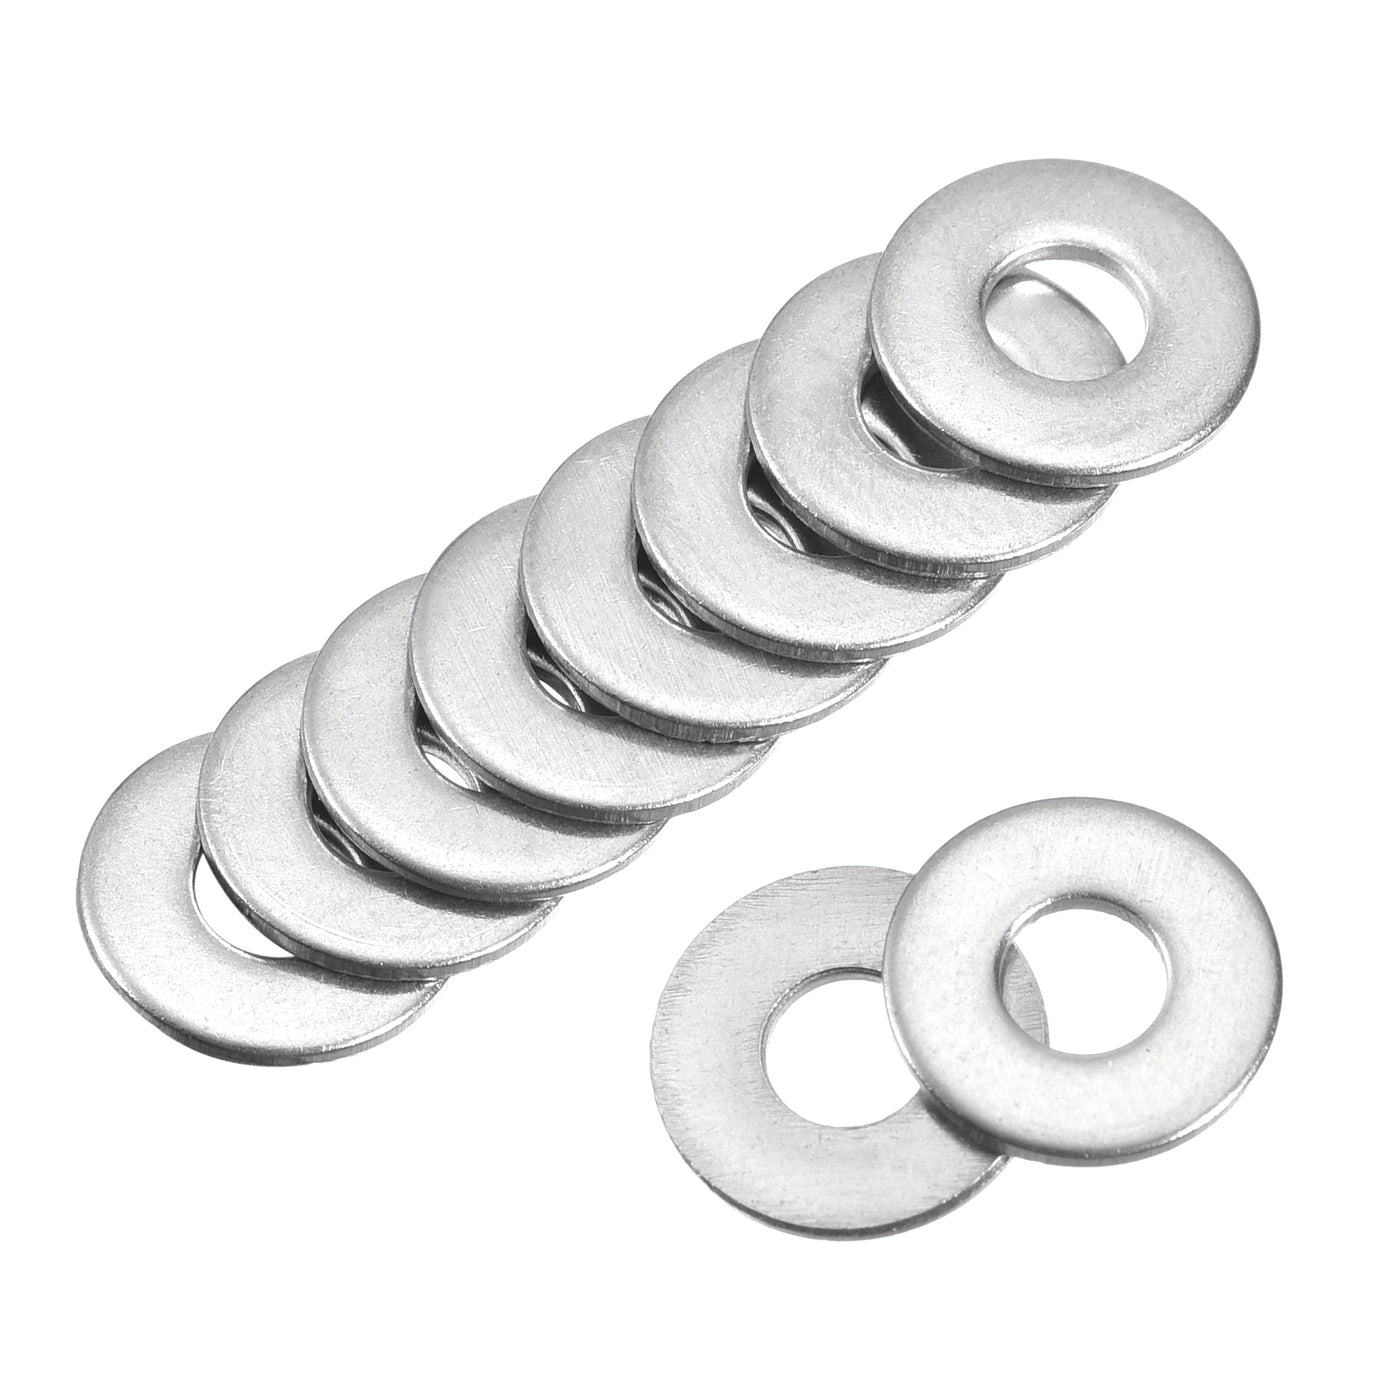 uxcell Uxcell 316 Stainless Steel Flat Washer for Machine, Furniture